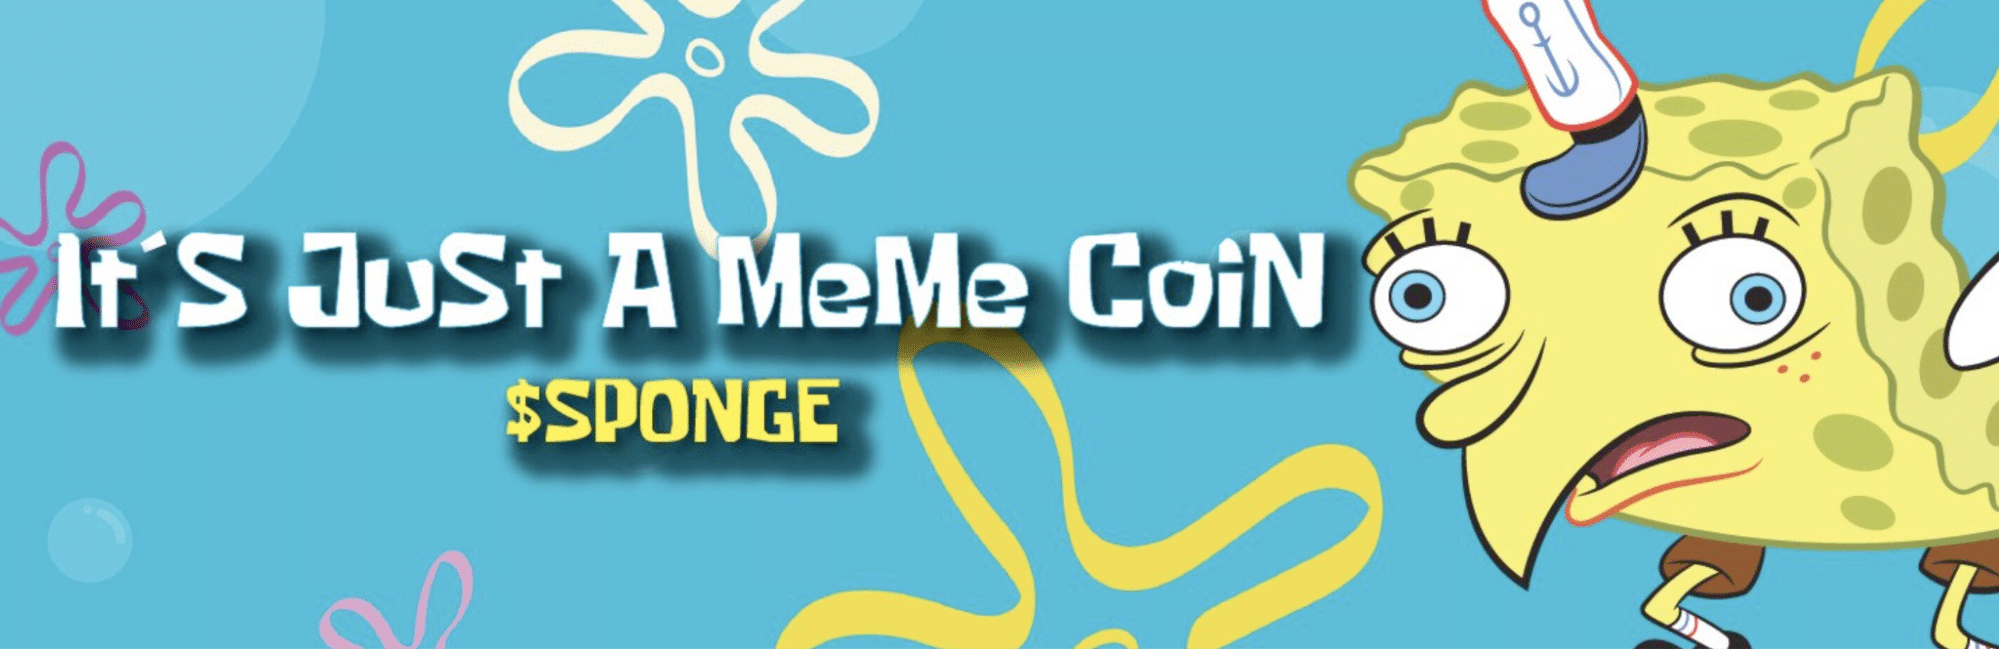 PEPE Finished? Memecoin Mania Fades While SPONGE Continues to Surge